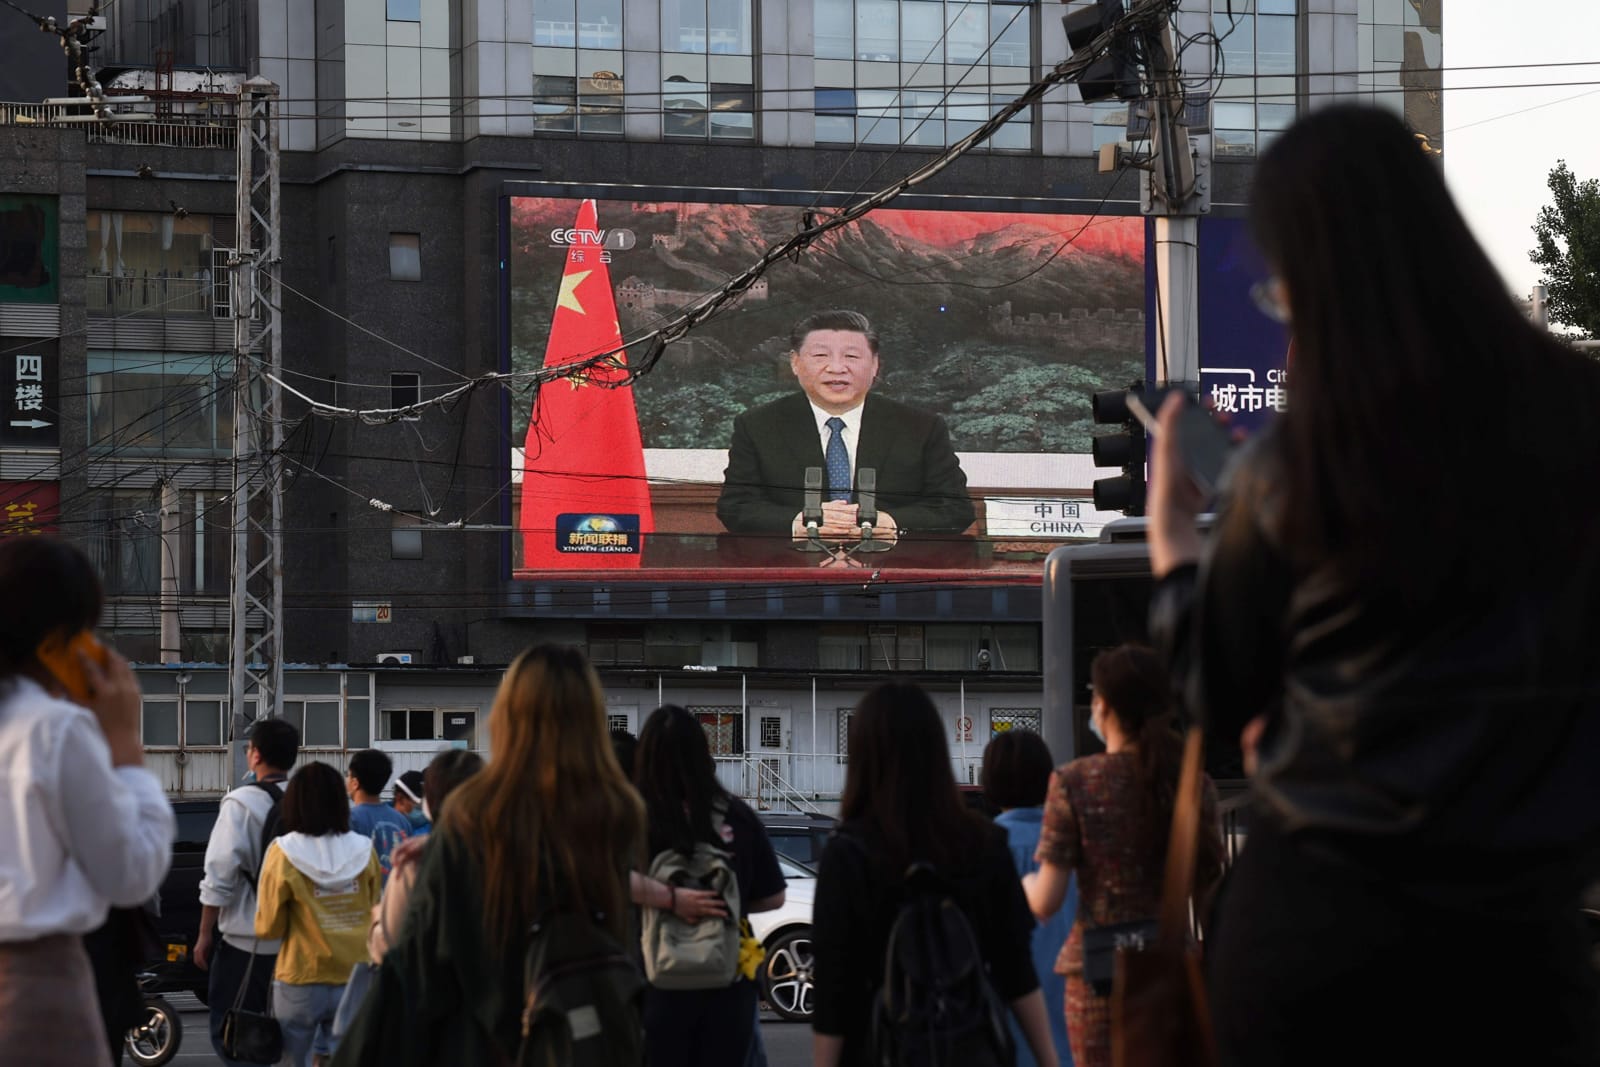 A street broadcast in Beijing of China’s Xi Jinping speaking via video link to the World Health Assembly in May 2020. Taiwan was not permitted to do so. (Greg Baker/AFP via Getty Images)